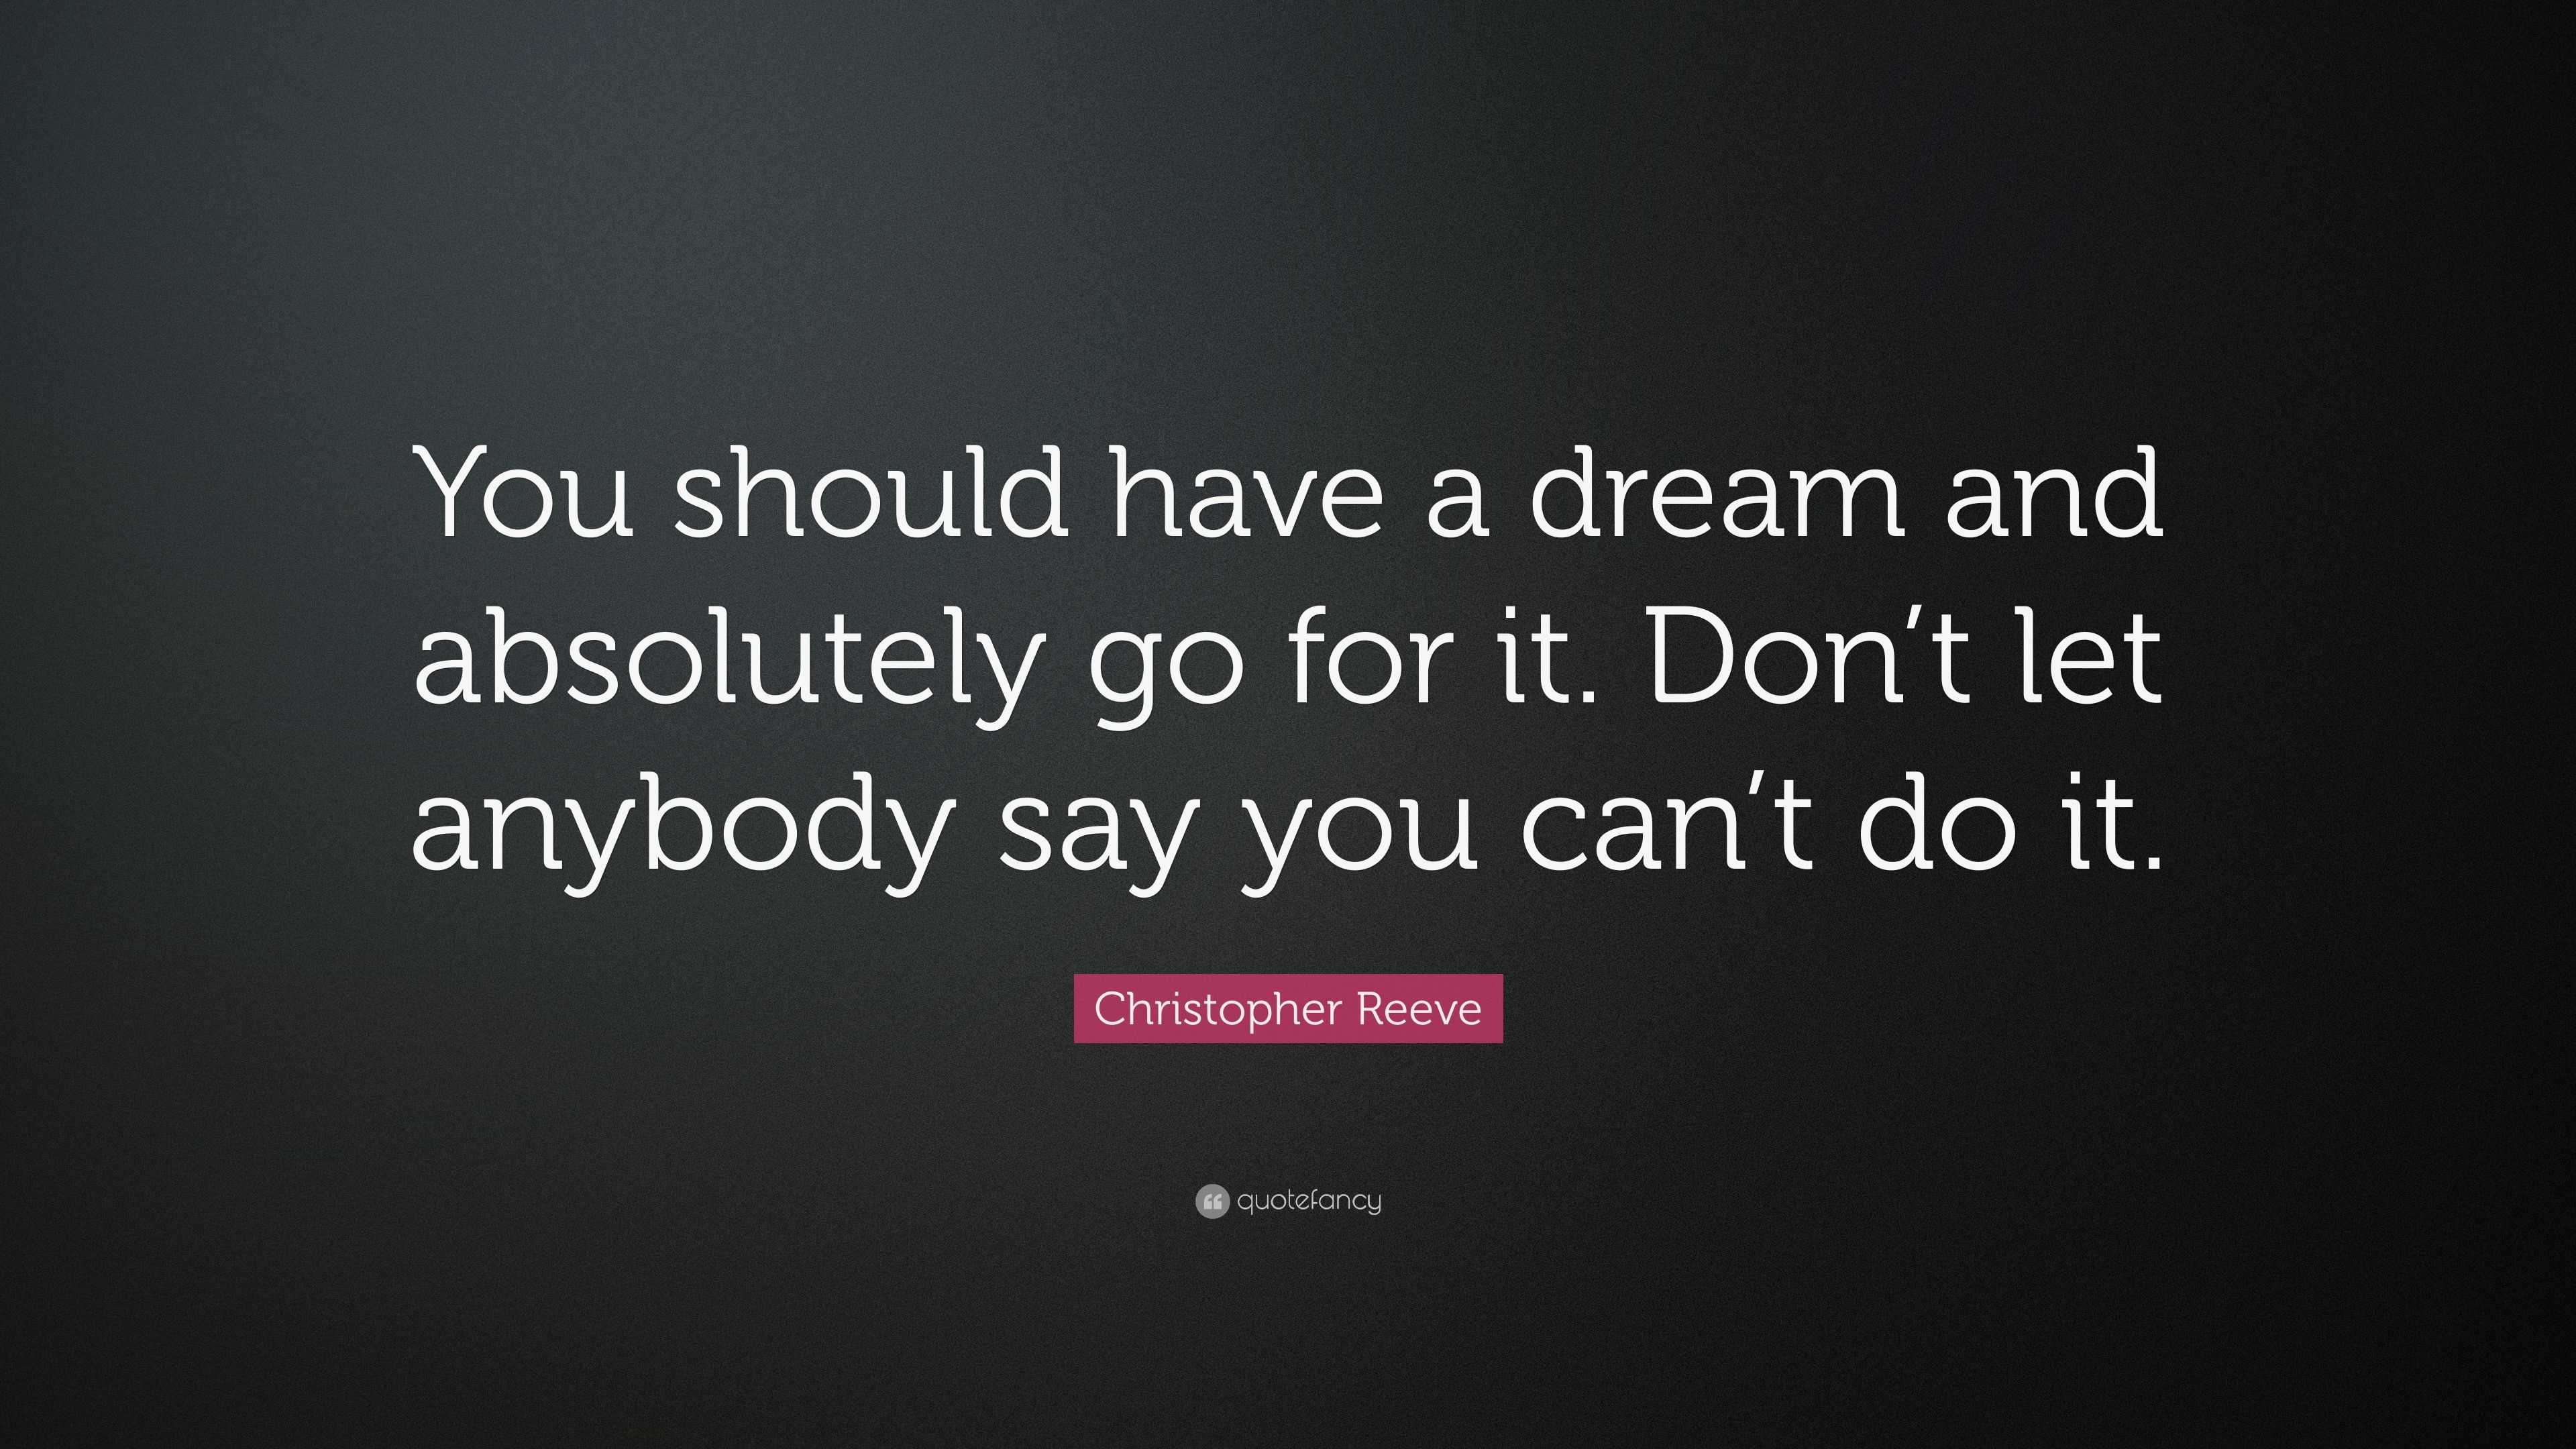 Christopher Reeve Quote: “You should have a dream and absolutely go for ...